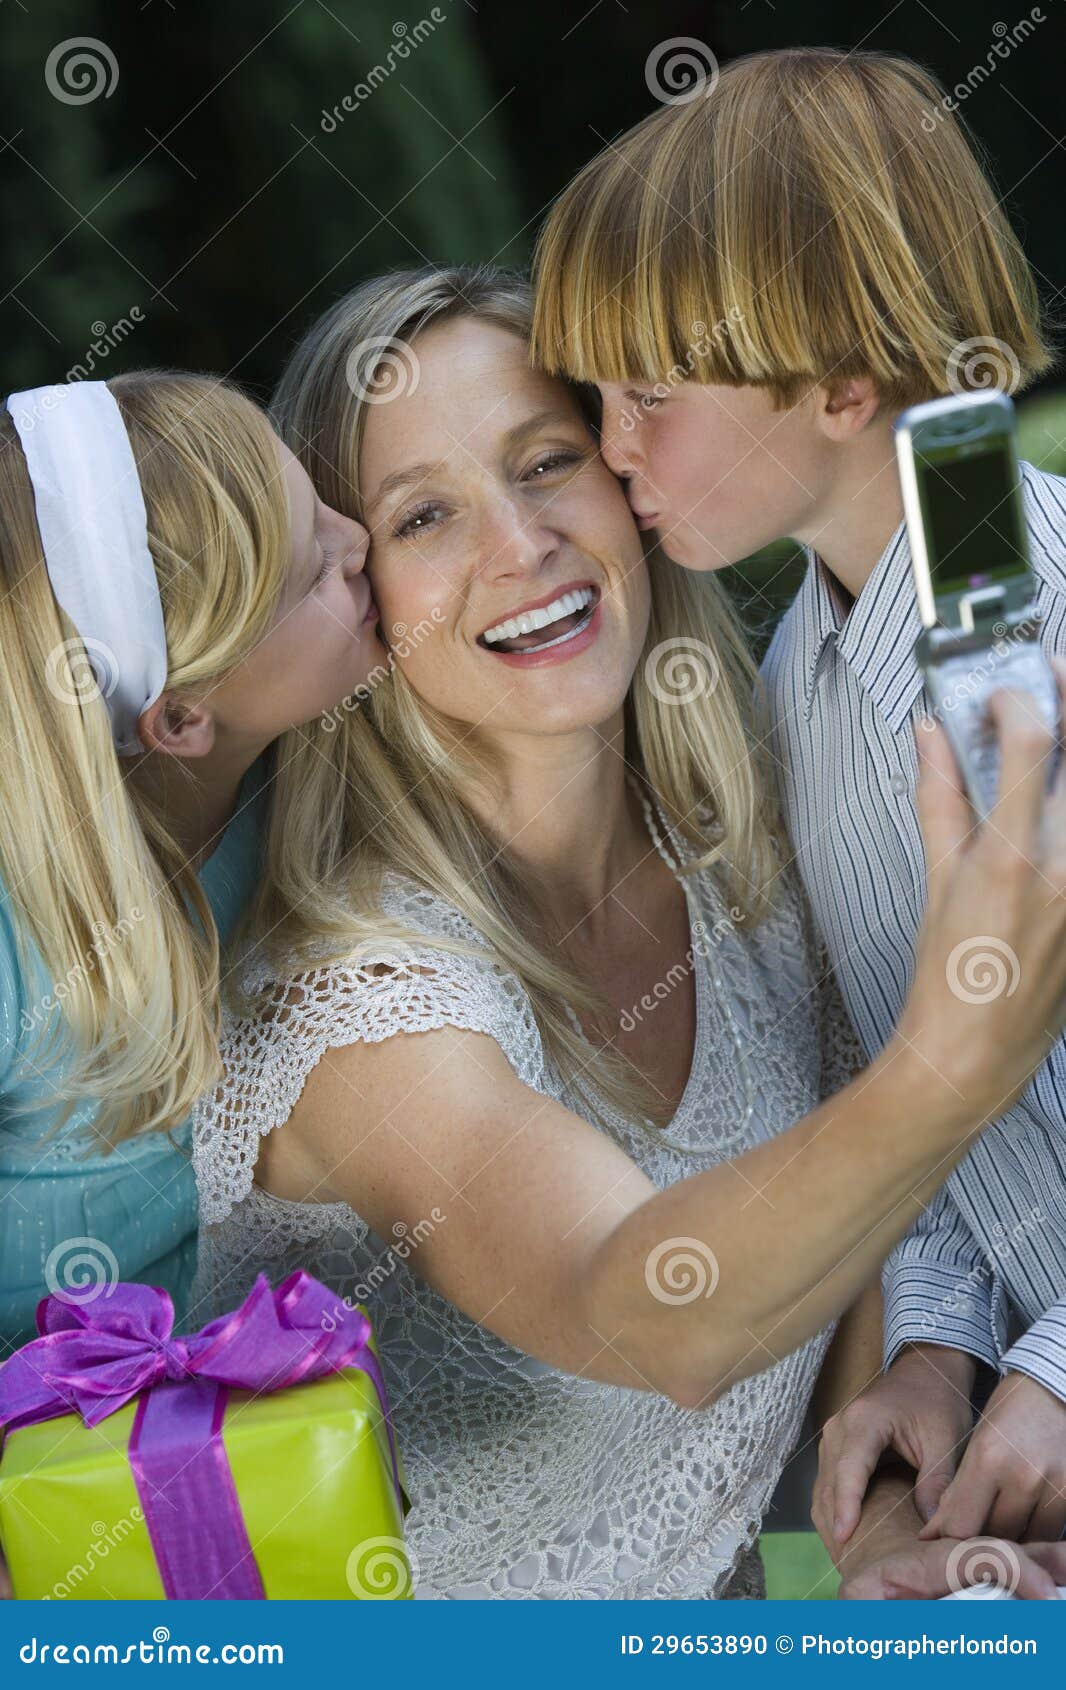 mother clicking self photo while kids kissing